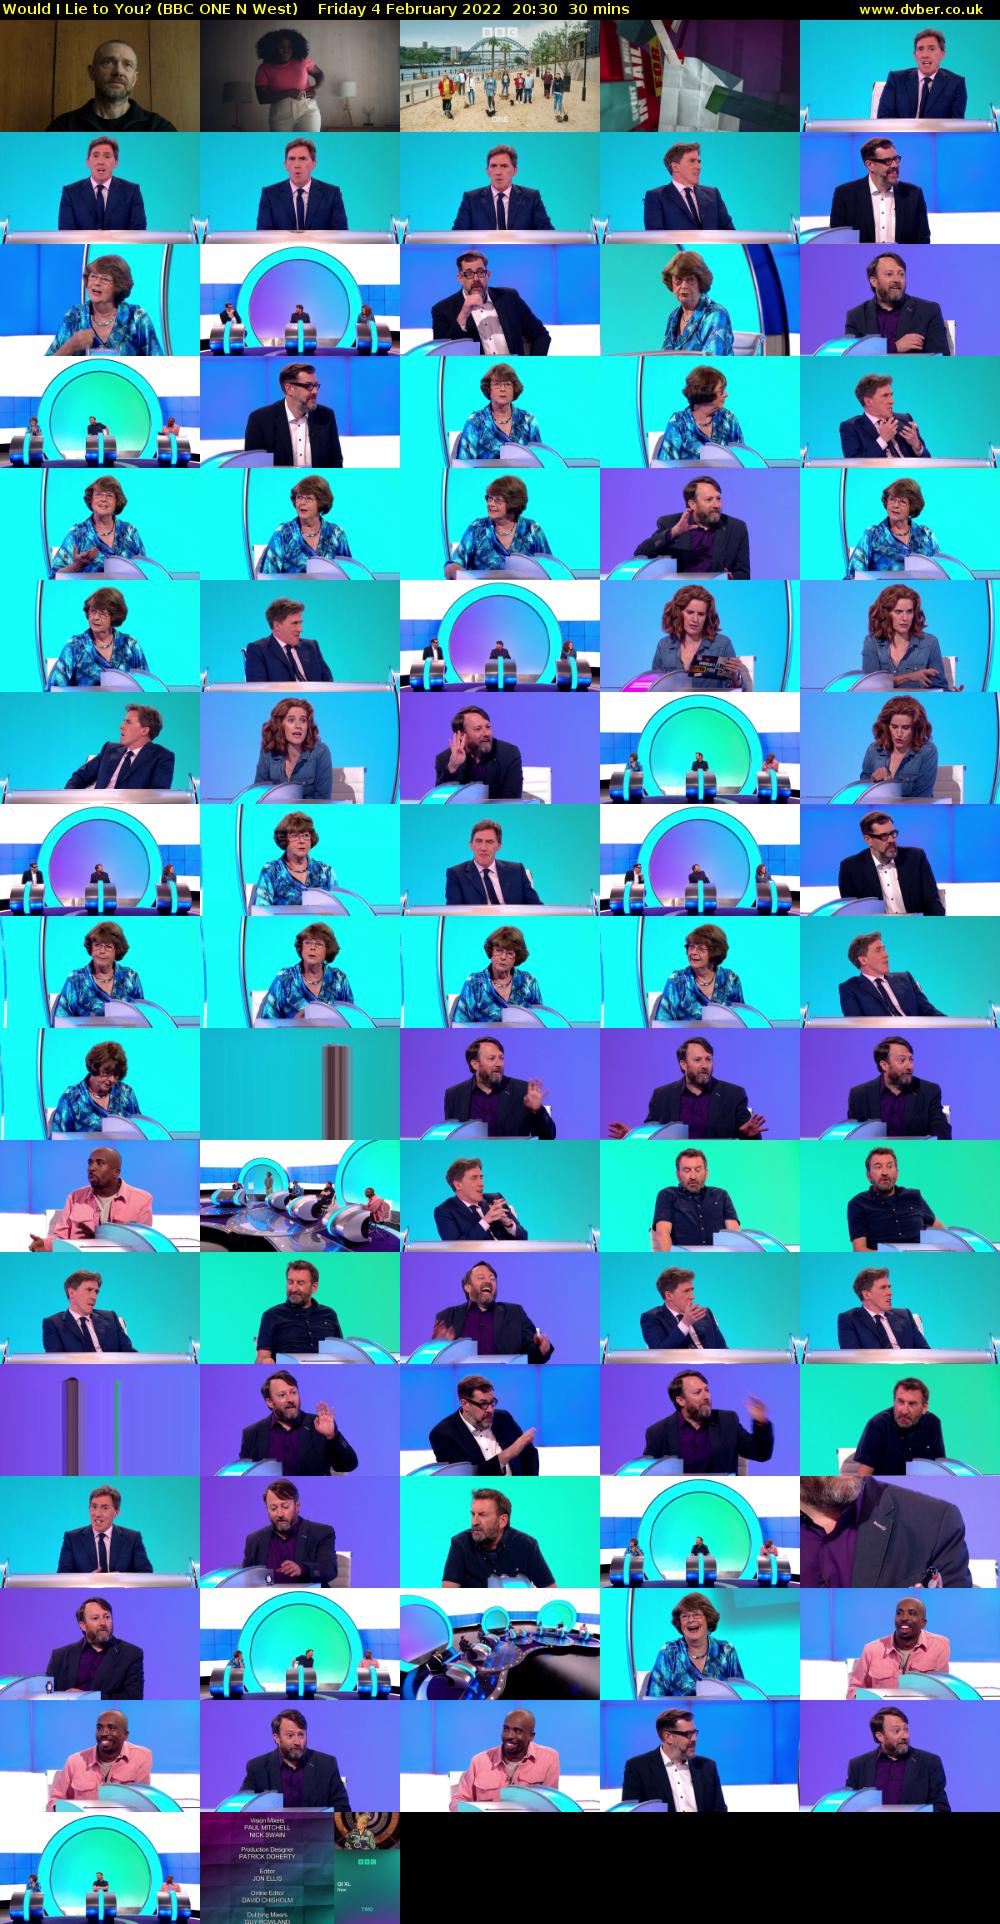 Would I Lie to You? (BBC ONE N West) Friday 4 February 2022 20:30 - 21:00